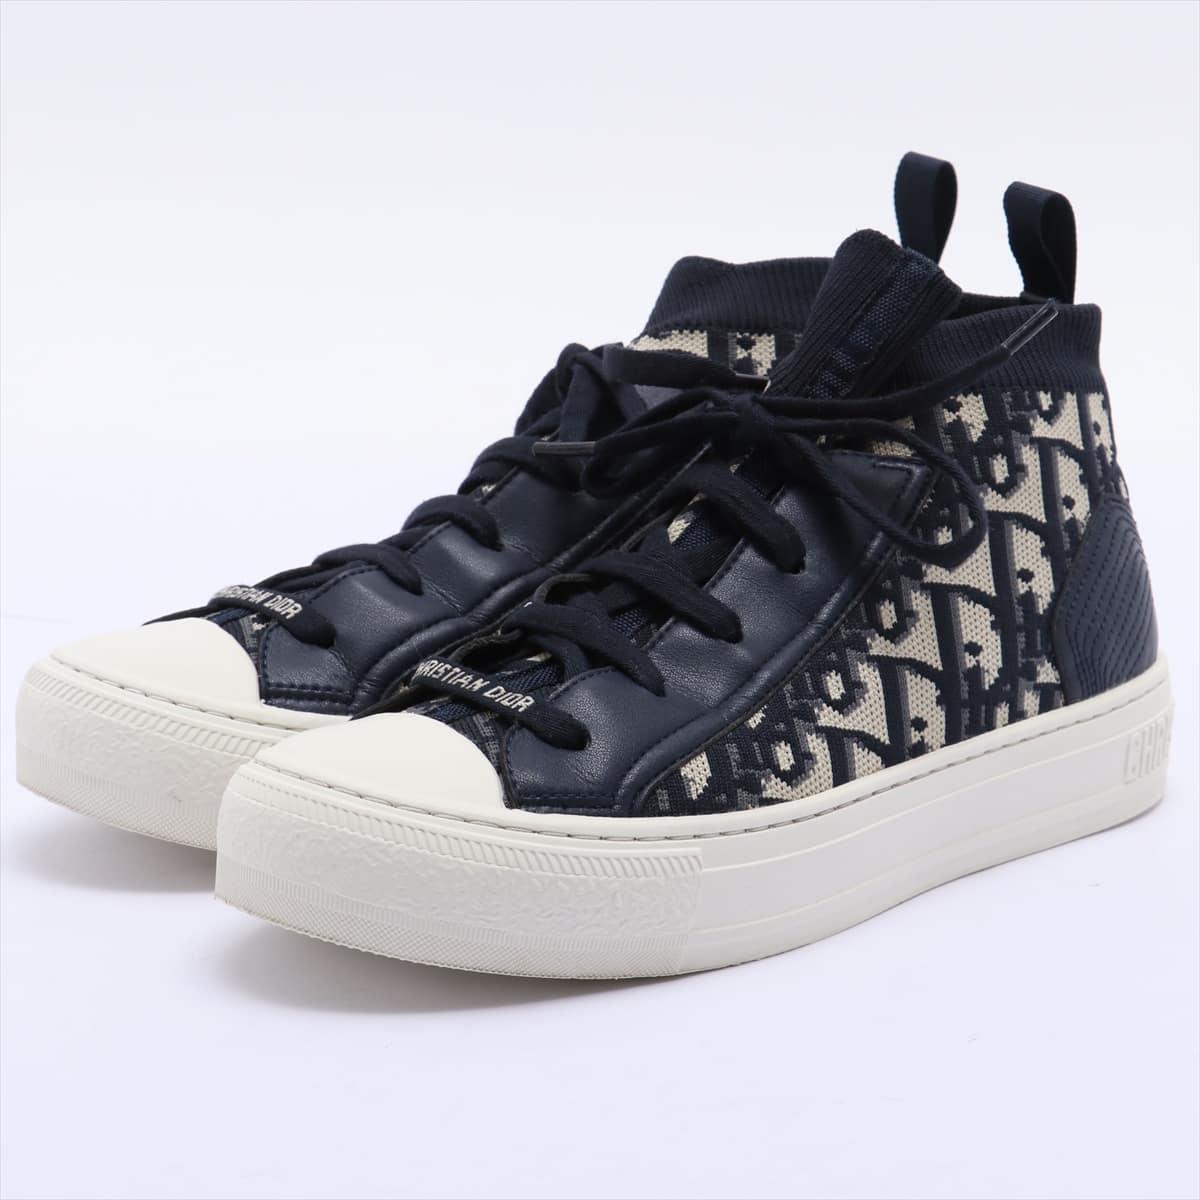 Christian Dior Oblique Knit High-top Sneakers 39 Ladies' Navy blue WALK'N'DIOR technical mesh